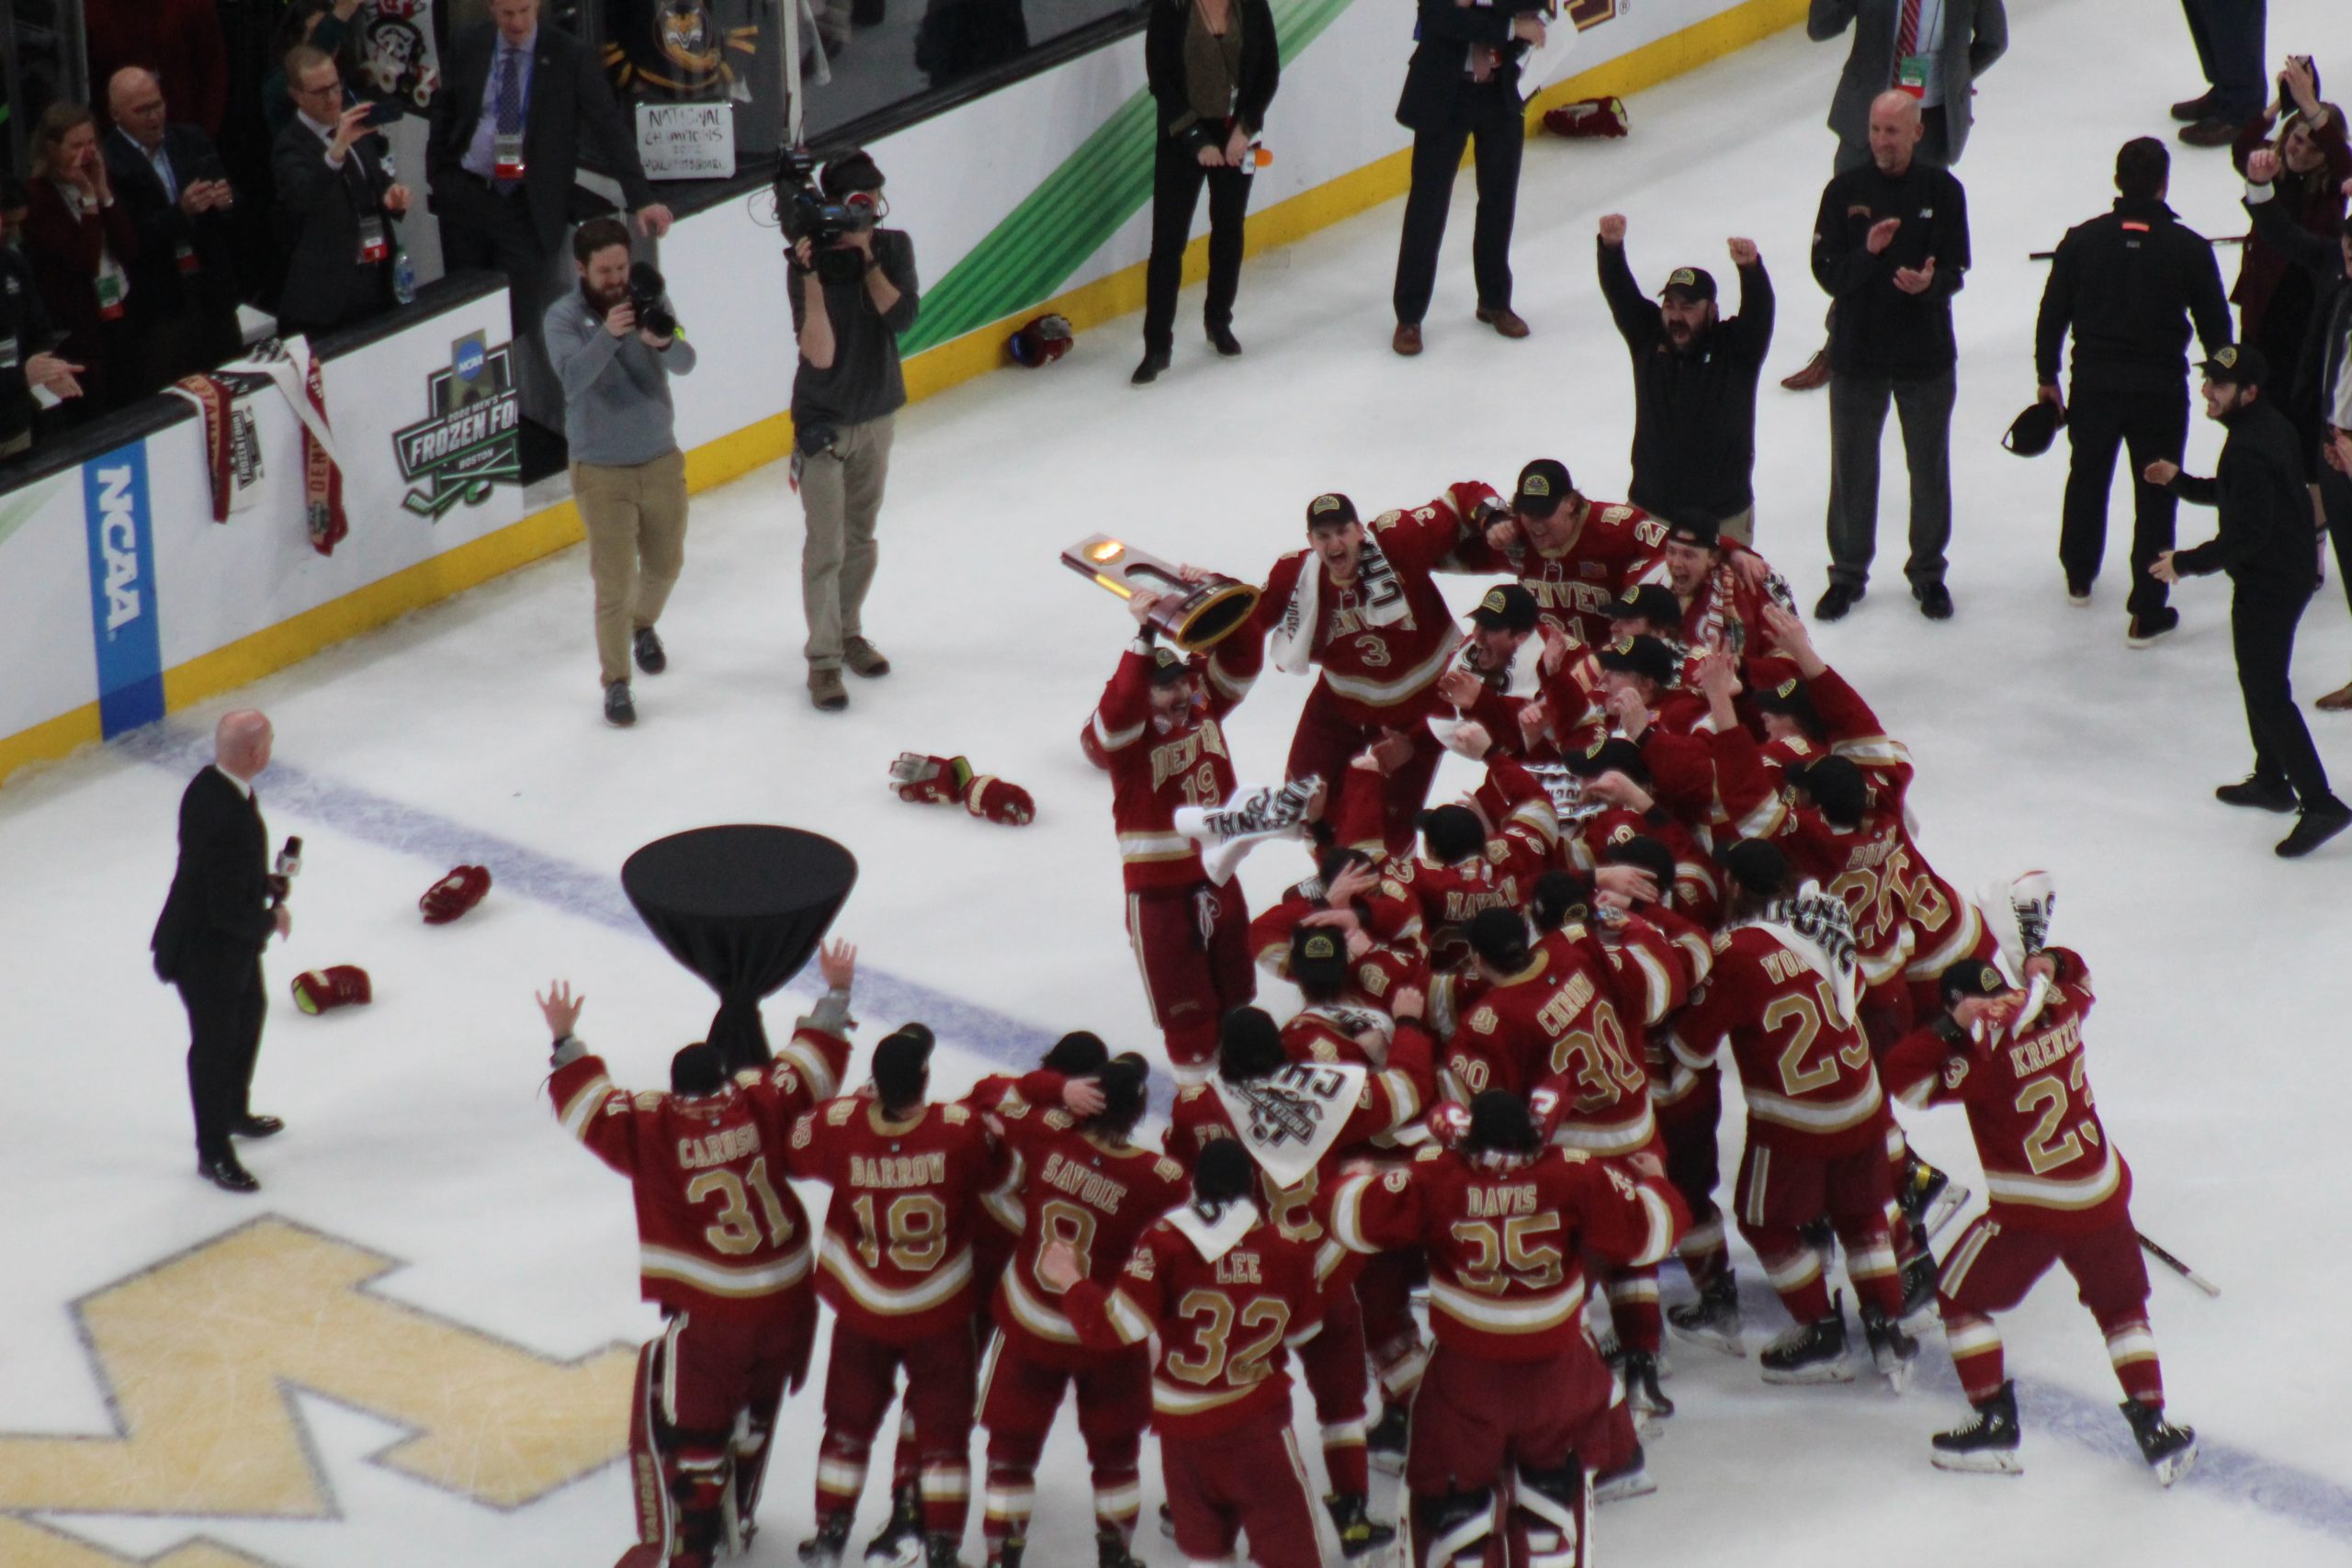 Denver Tops Mankato in Third Period, Claims 9th National Crown